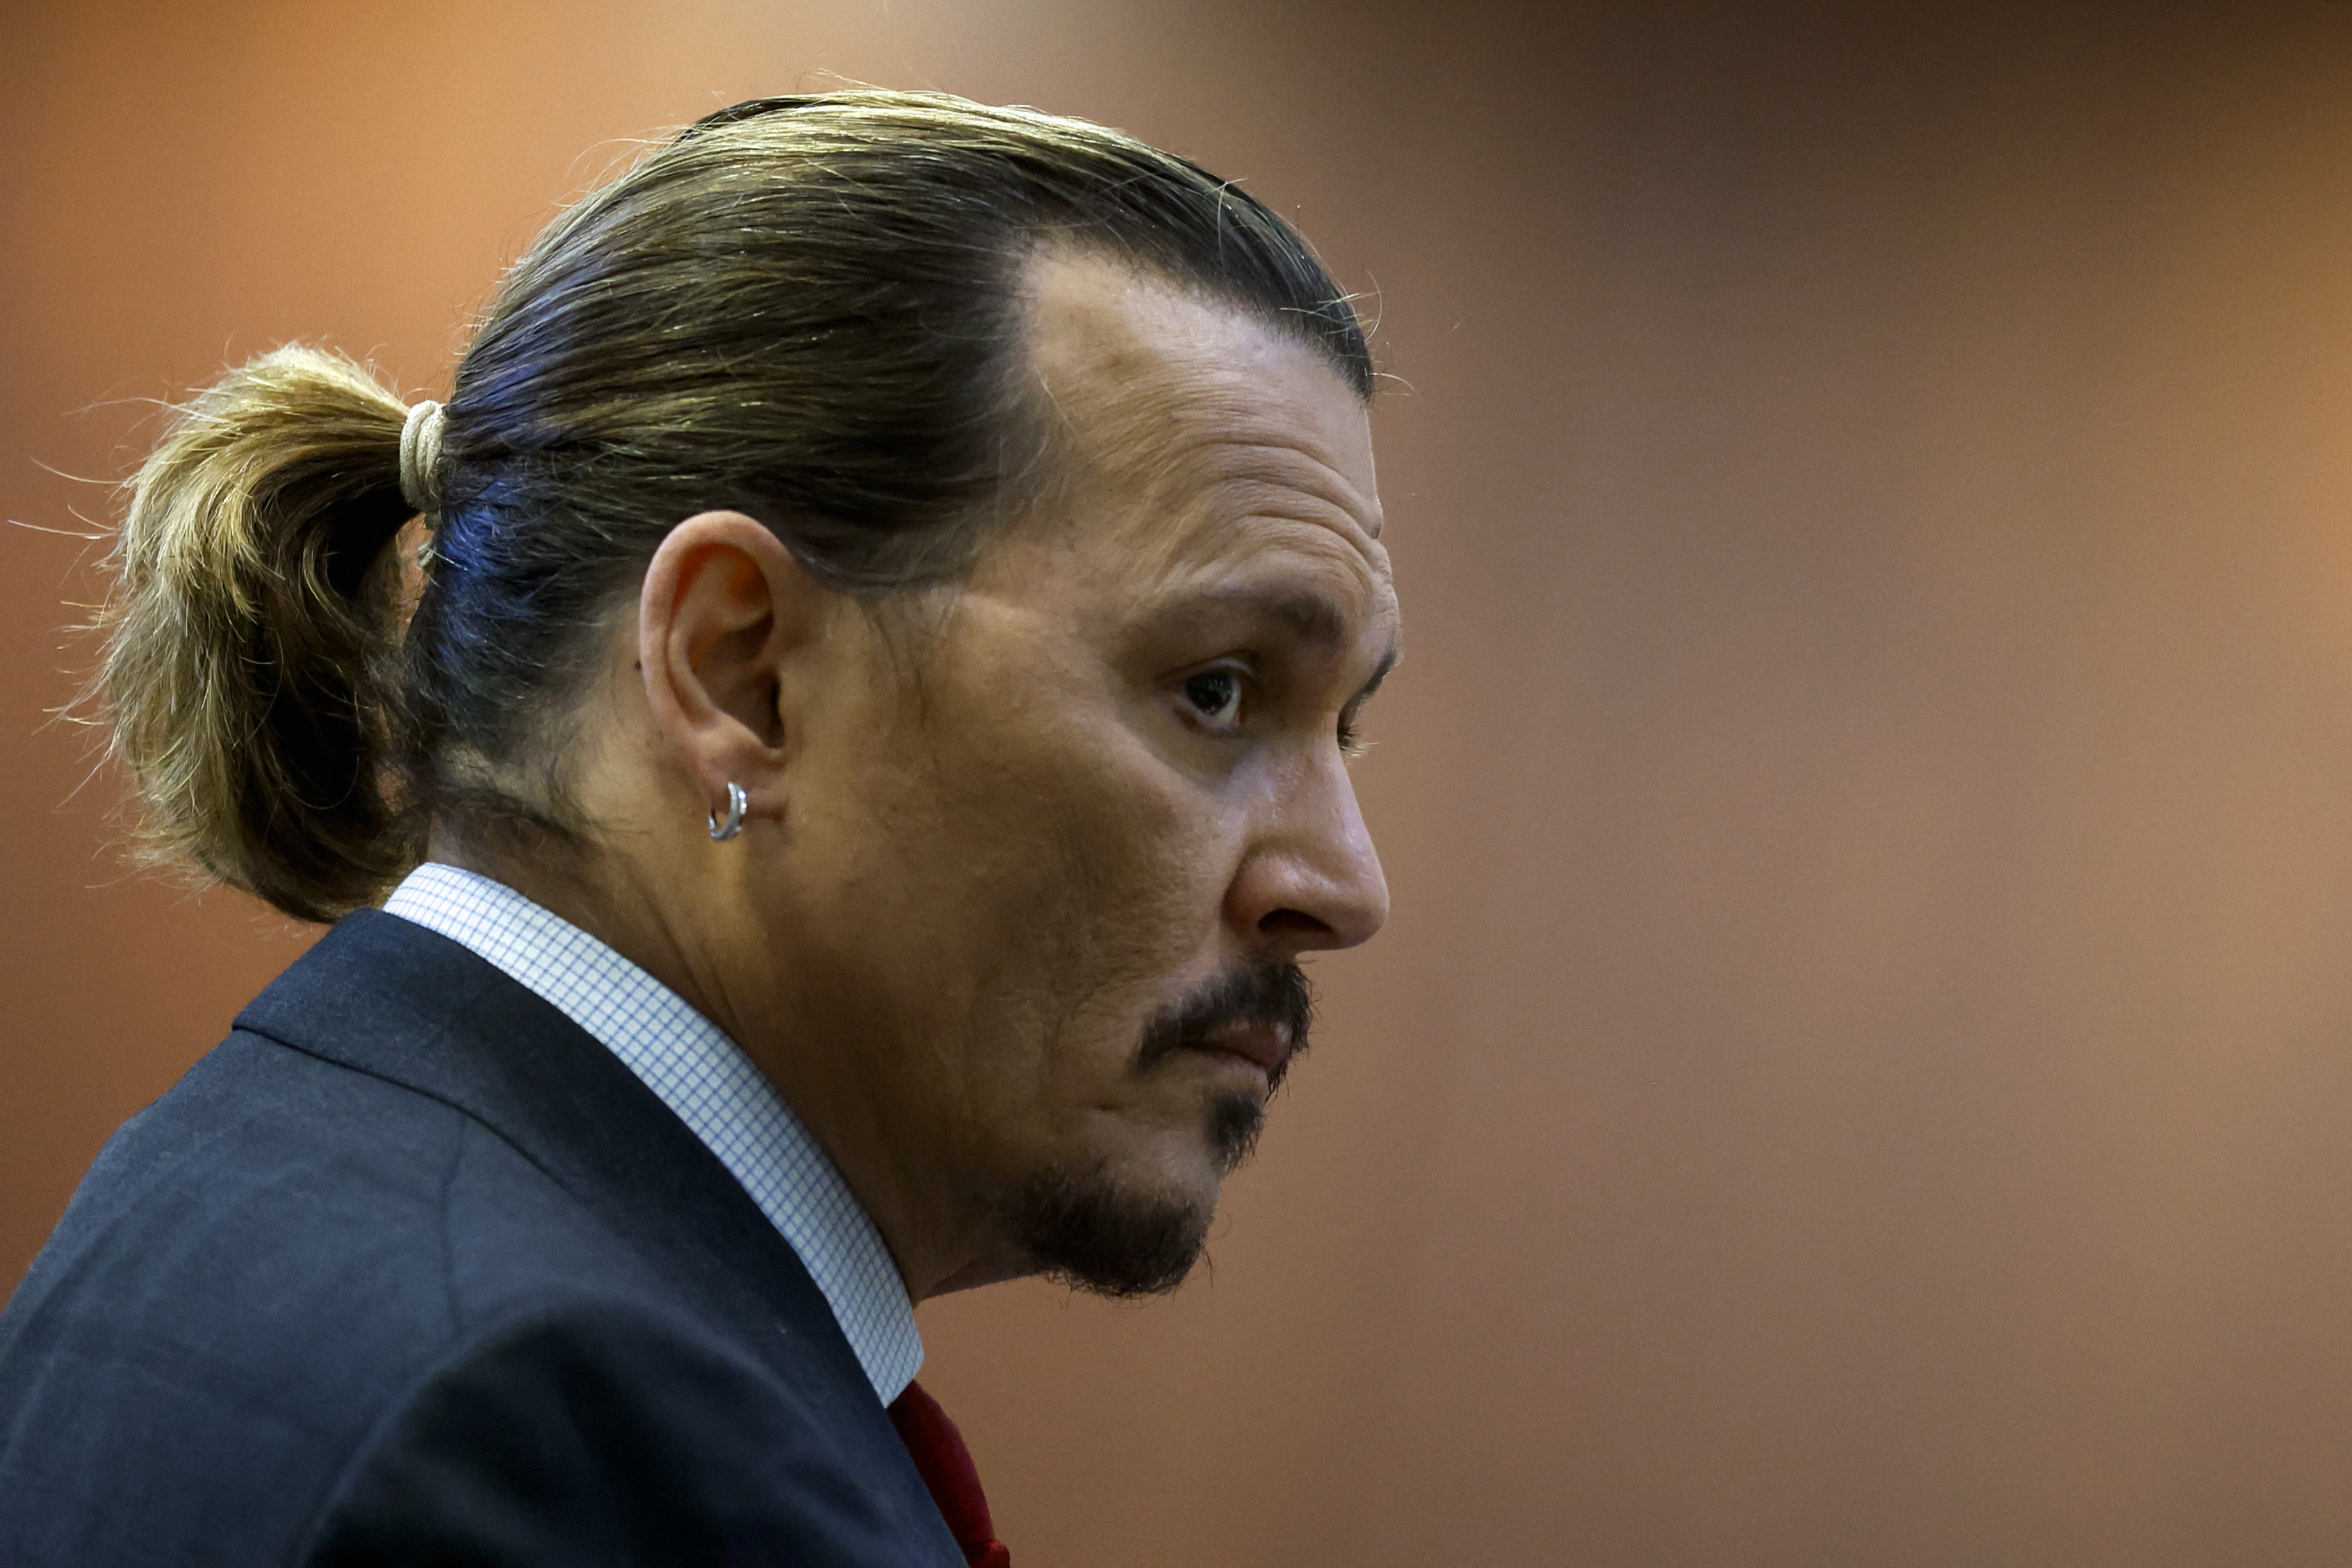 Actor Johnny Depp in court in lawsuit against ex-wife Amber Heard, April 2022 -